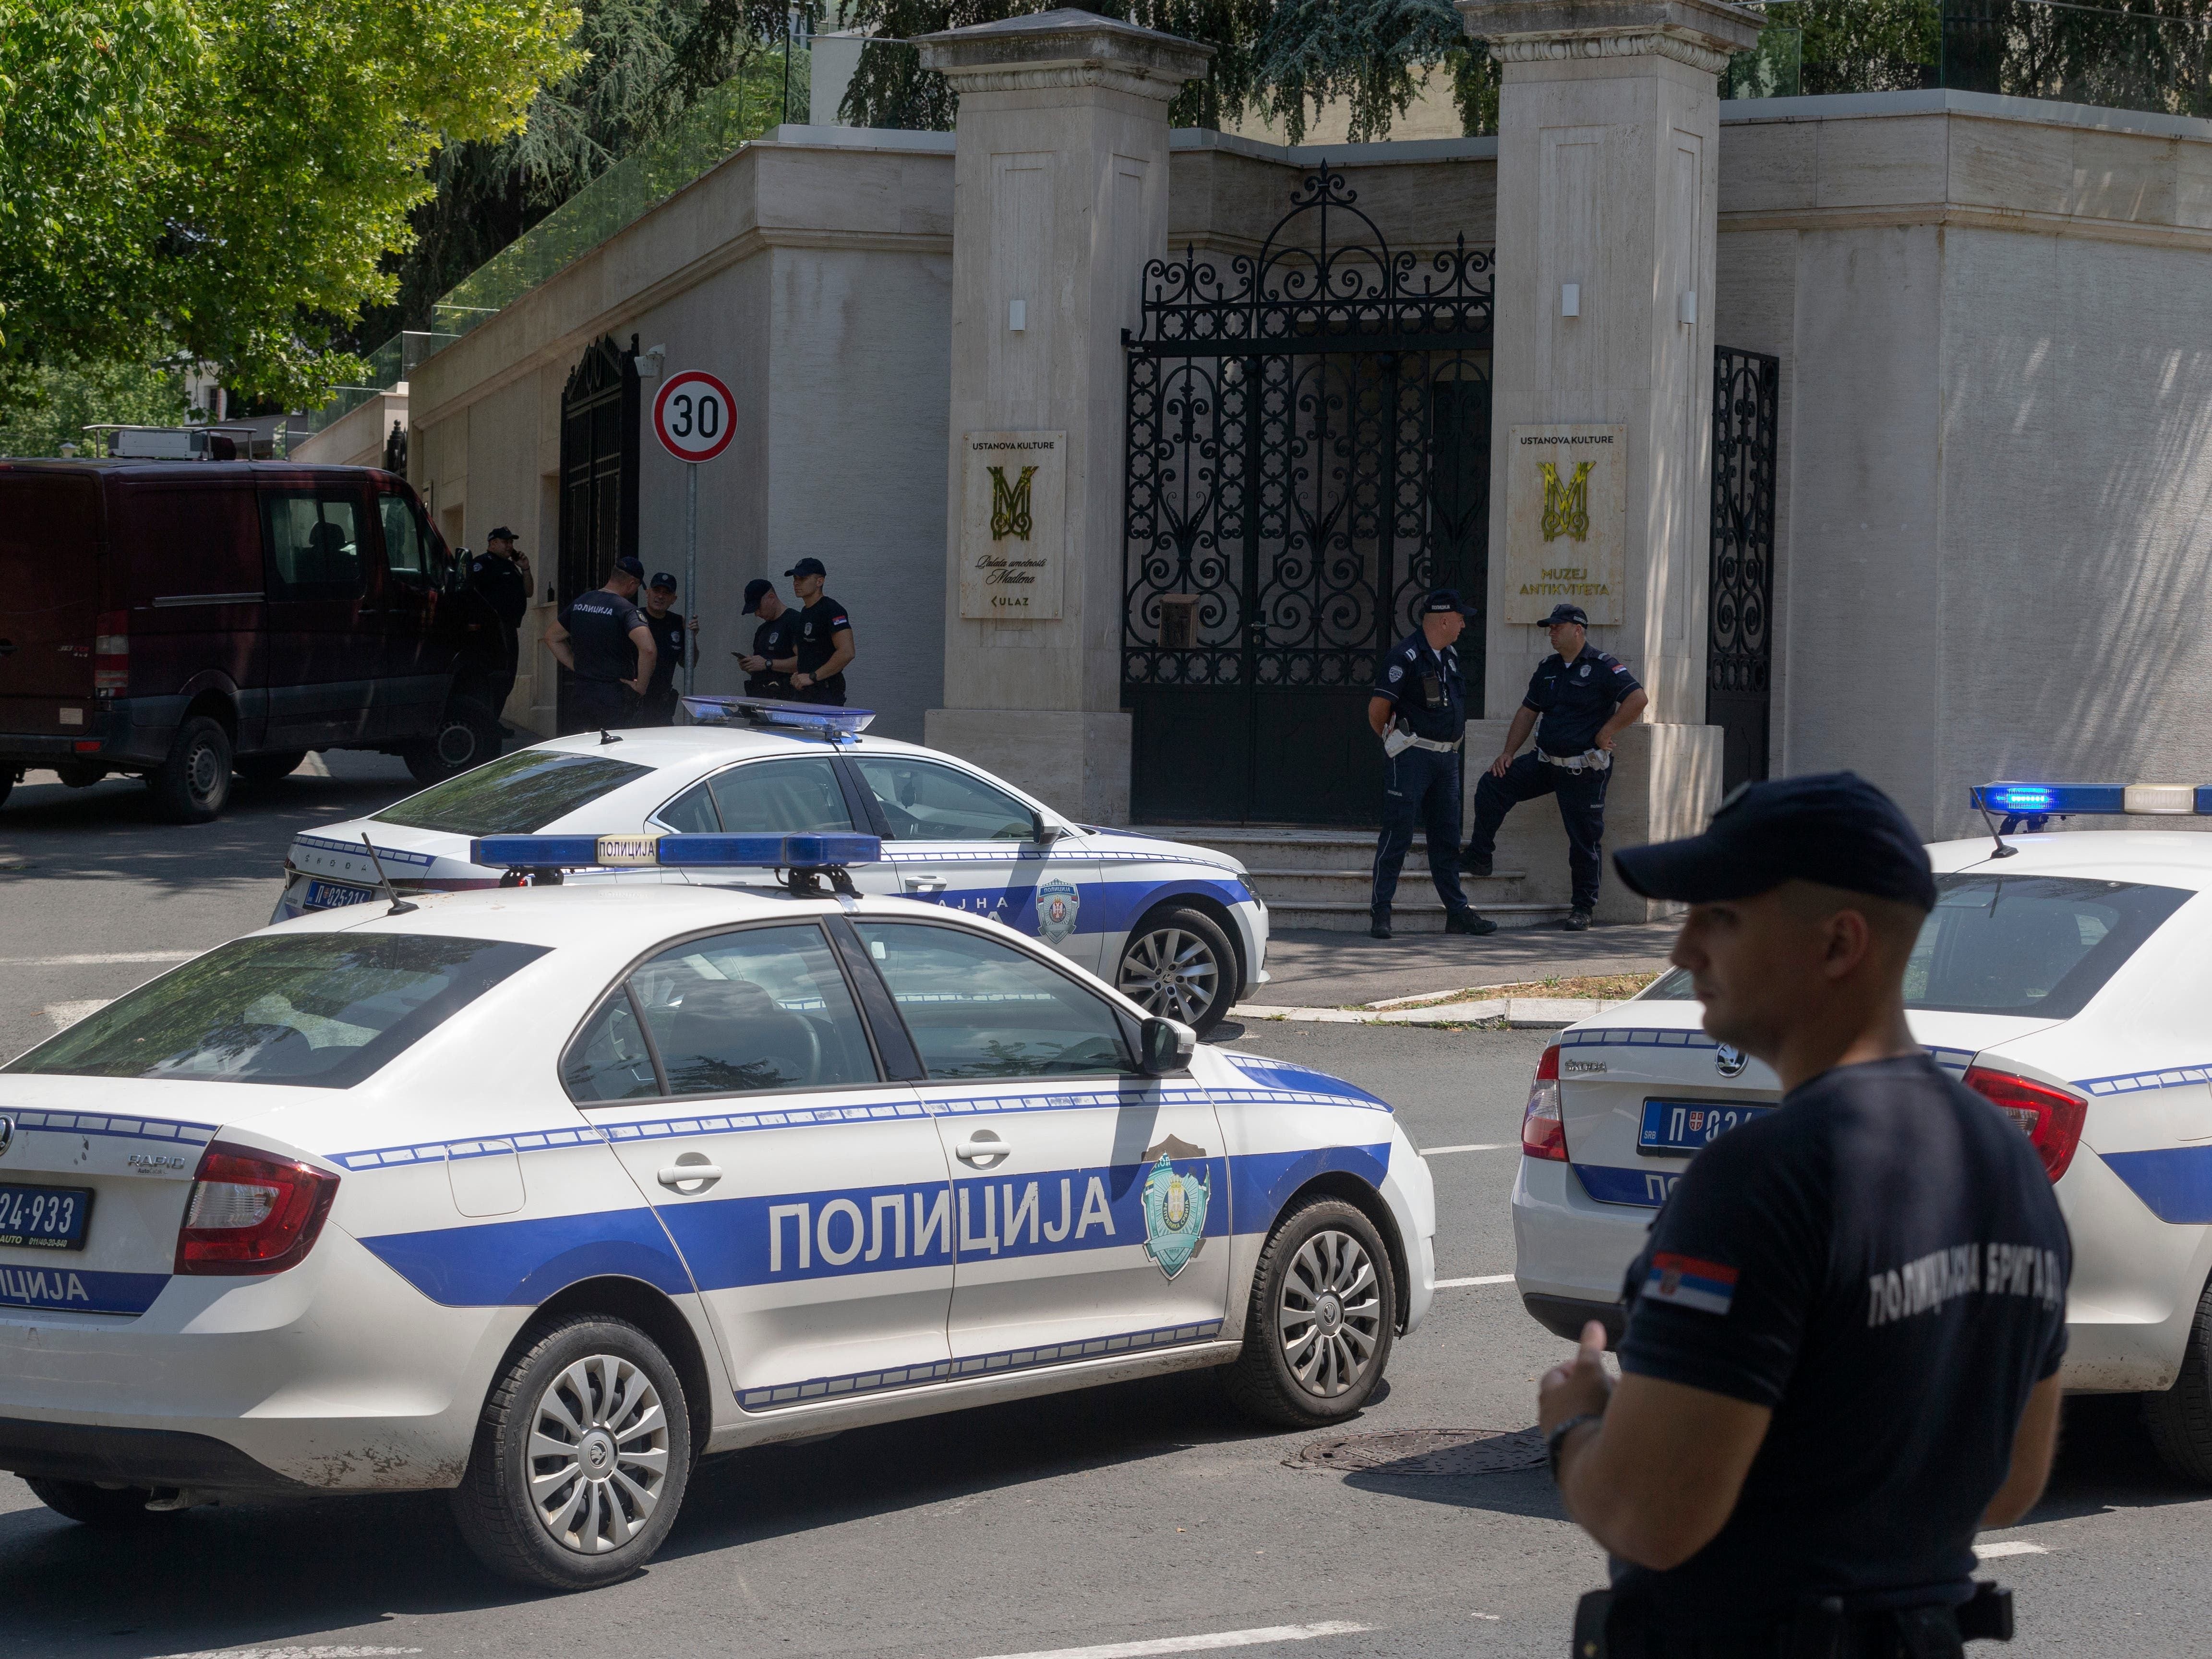 Crossbow attacker wounds police officer guarding Israel’s embassy in Serbia